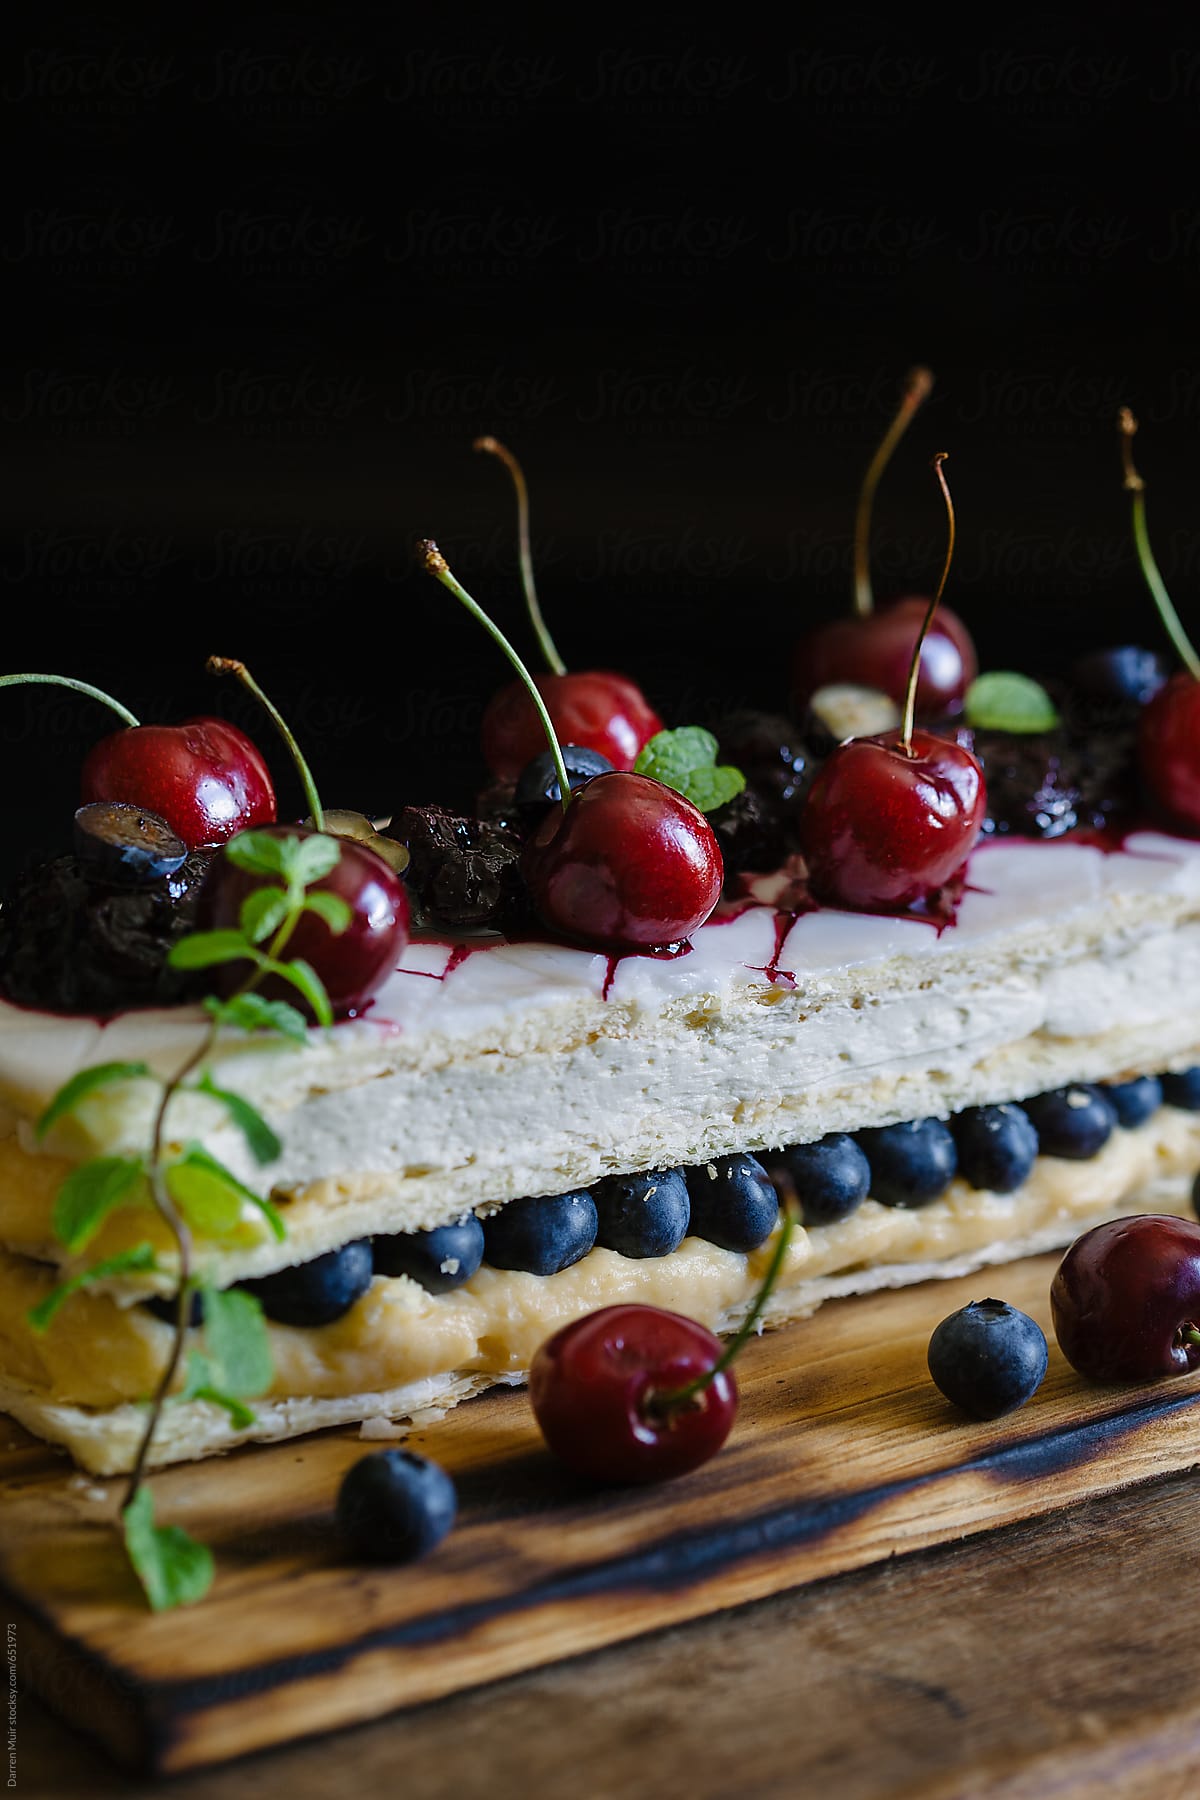 The layers of a mille-feuille, with creme pat, chantilly cream and fruits.